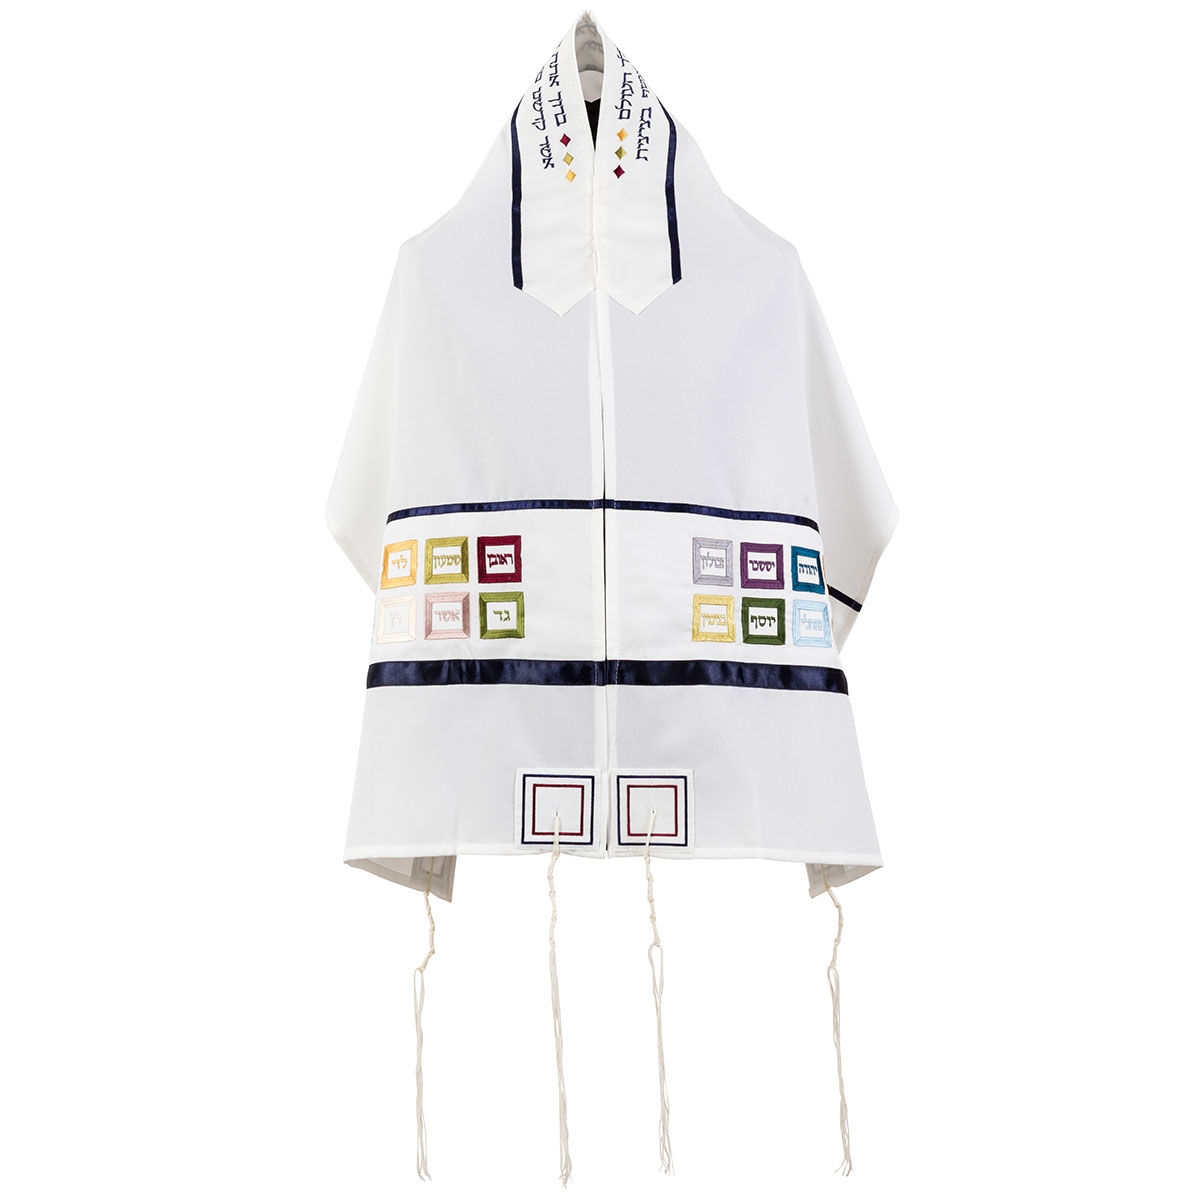 Ronit Gur Hoshen Tallit with Blessing Set with Kippah and Bag - 1